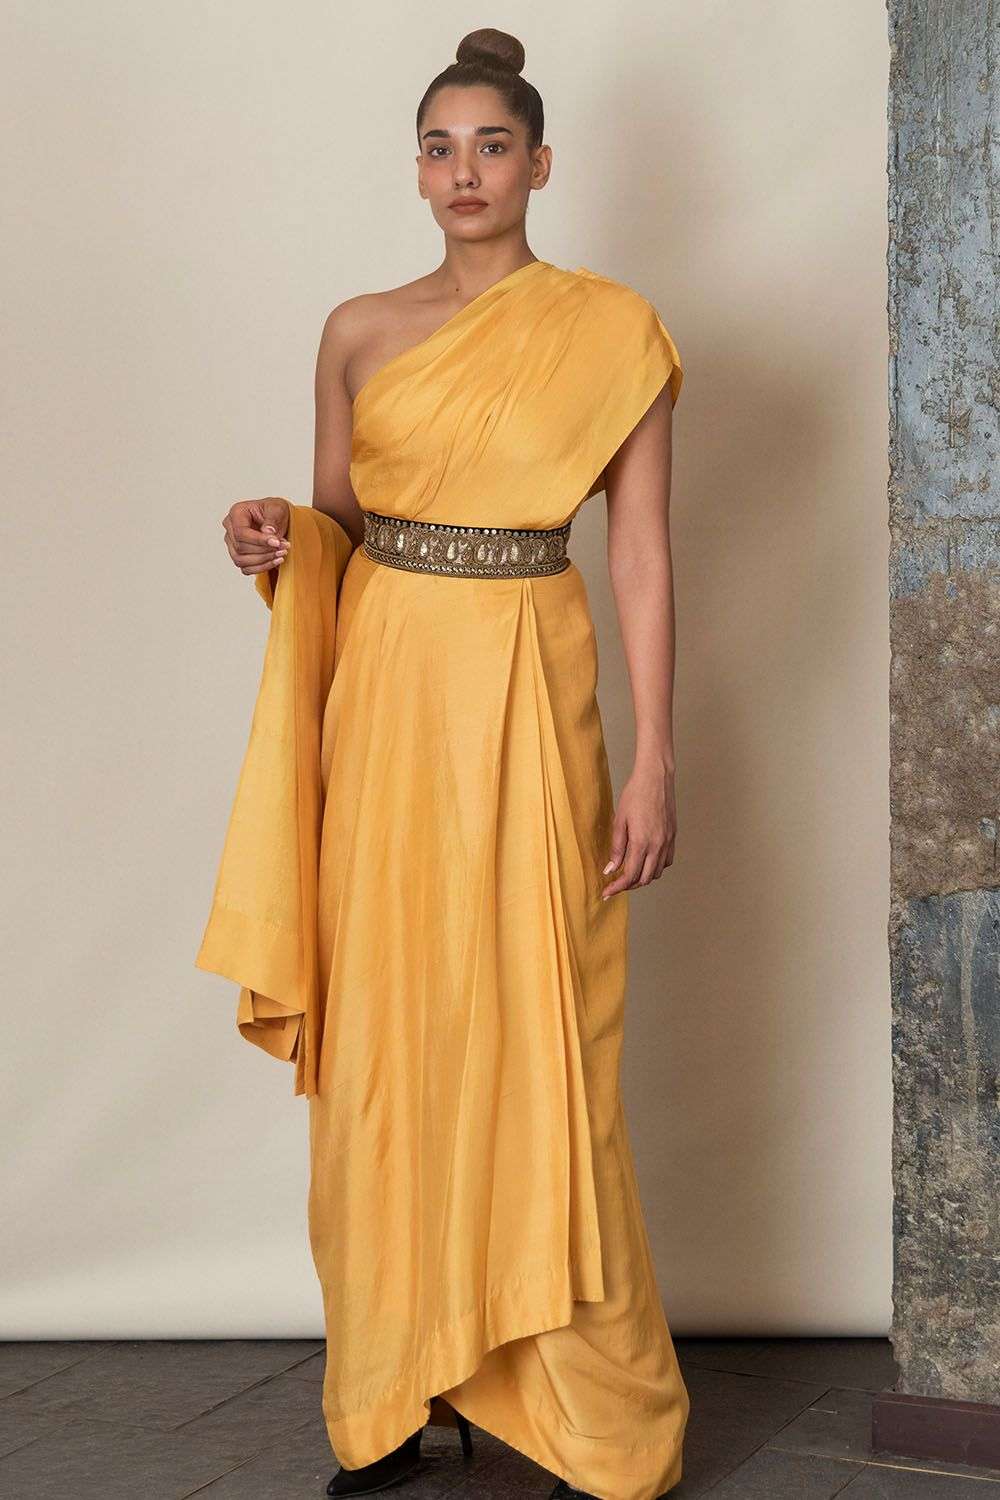 BoStreet Purple One Shoulder Maxi Dress Price in India, Full Specifications  & Offers | DTashion.com